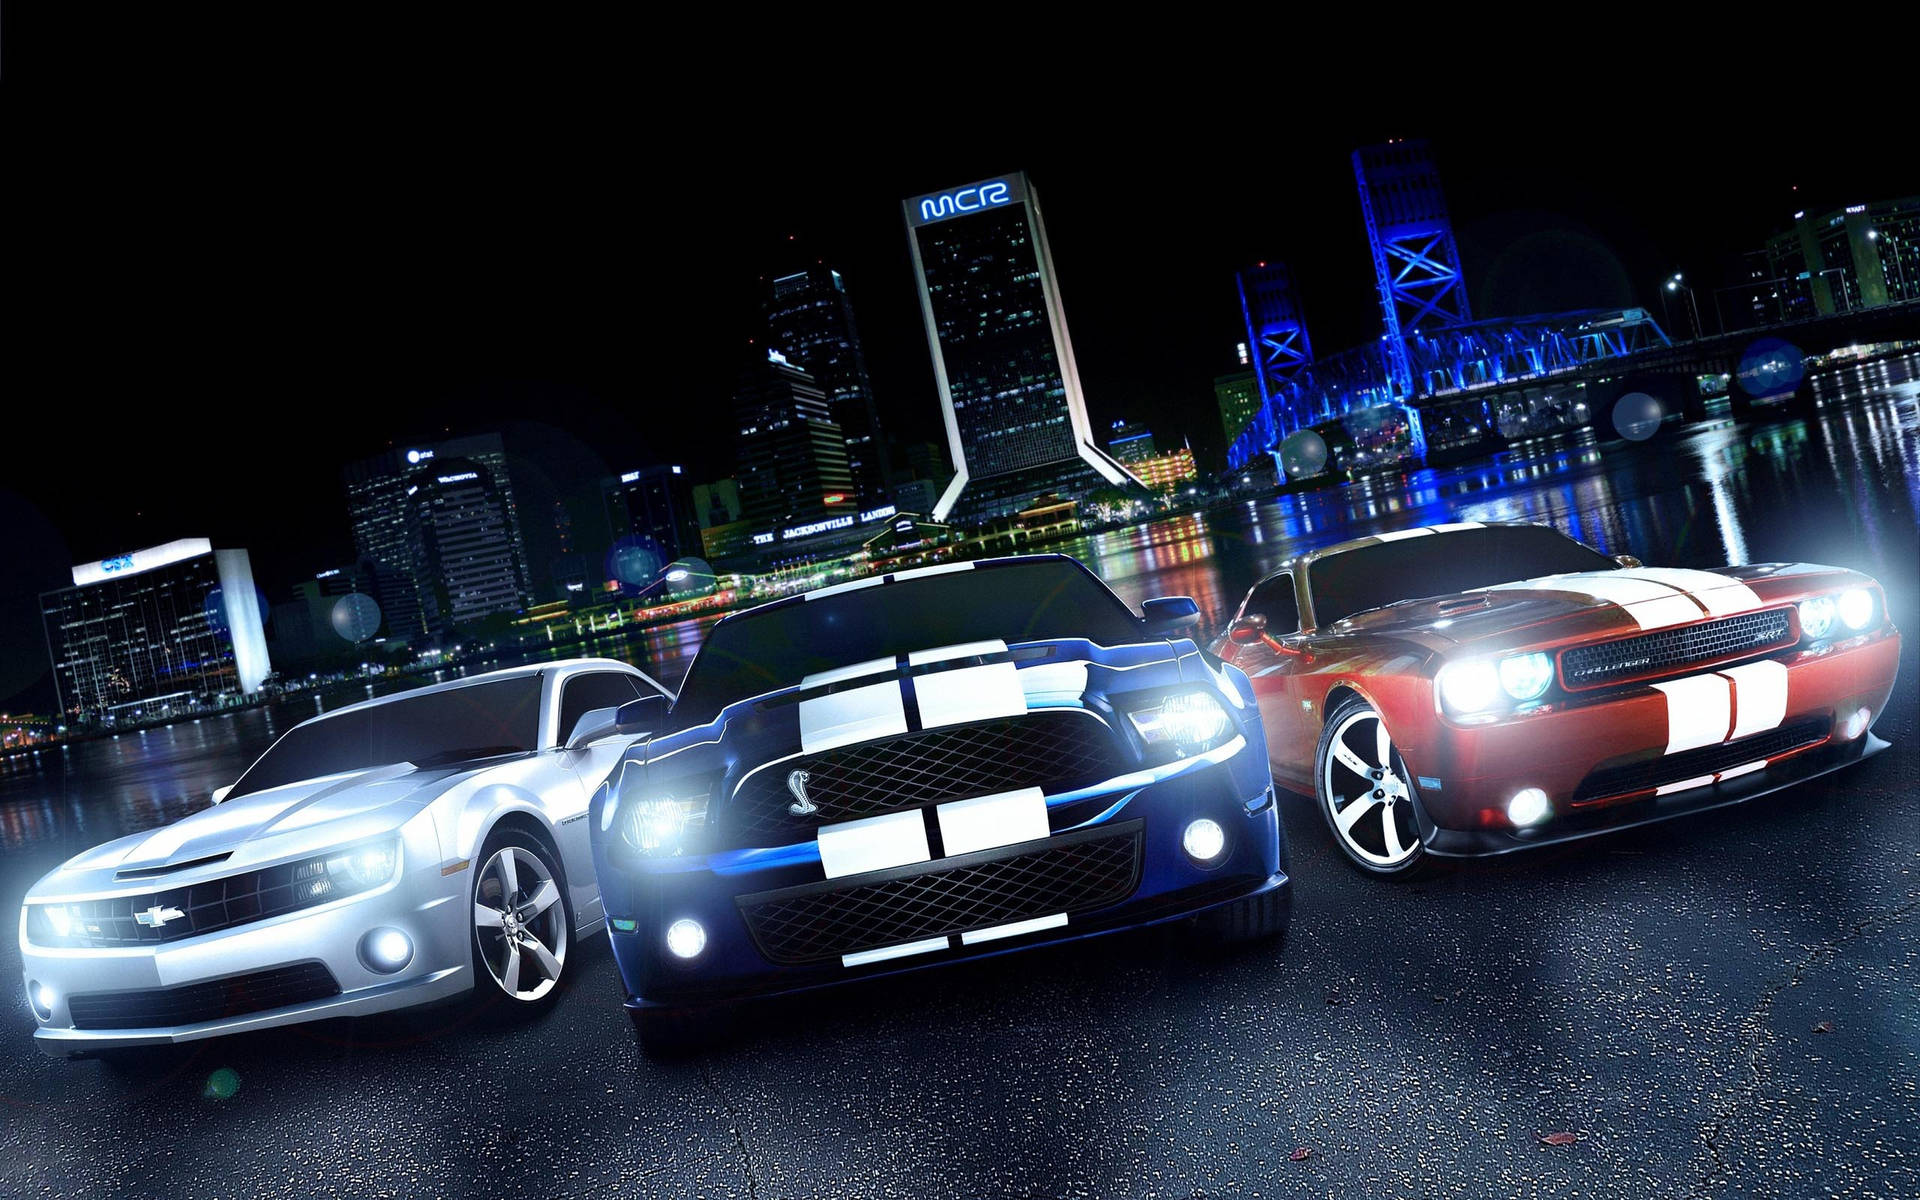 Download Cool Cars In The City Wallpaper